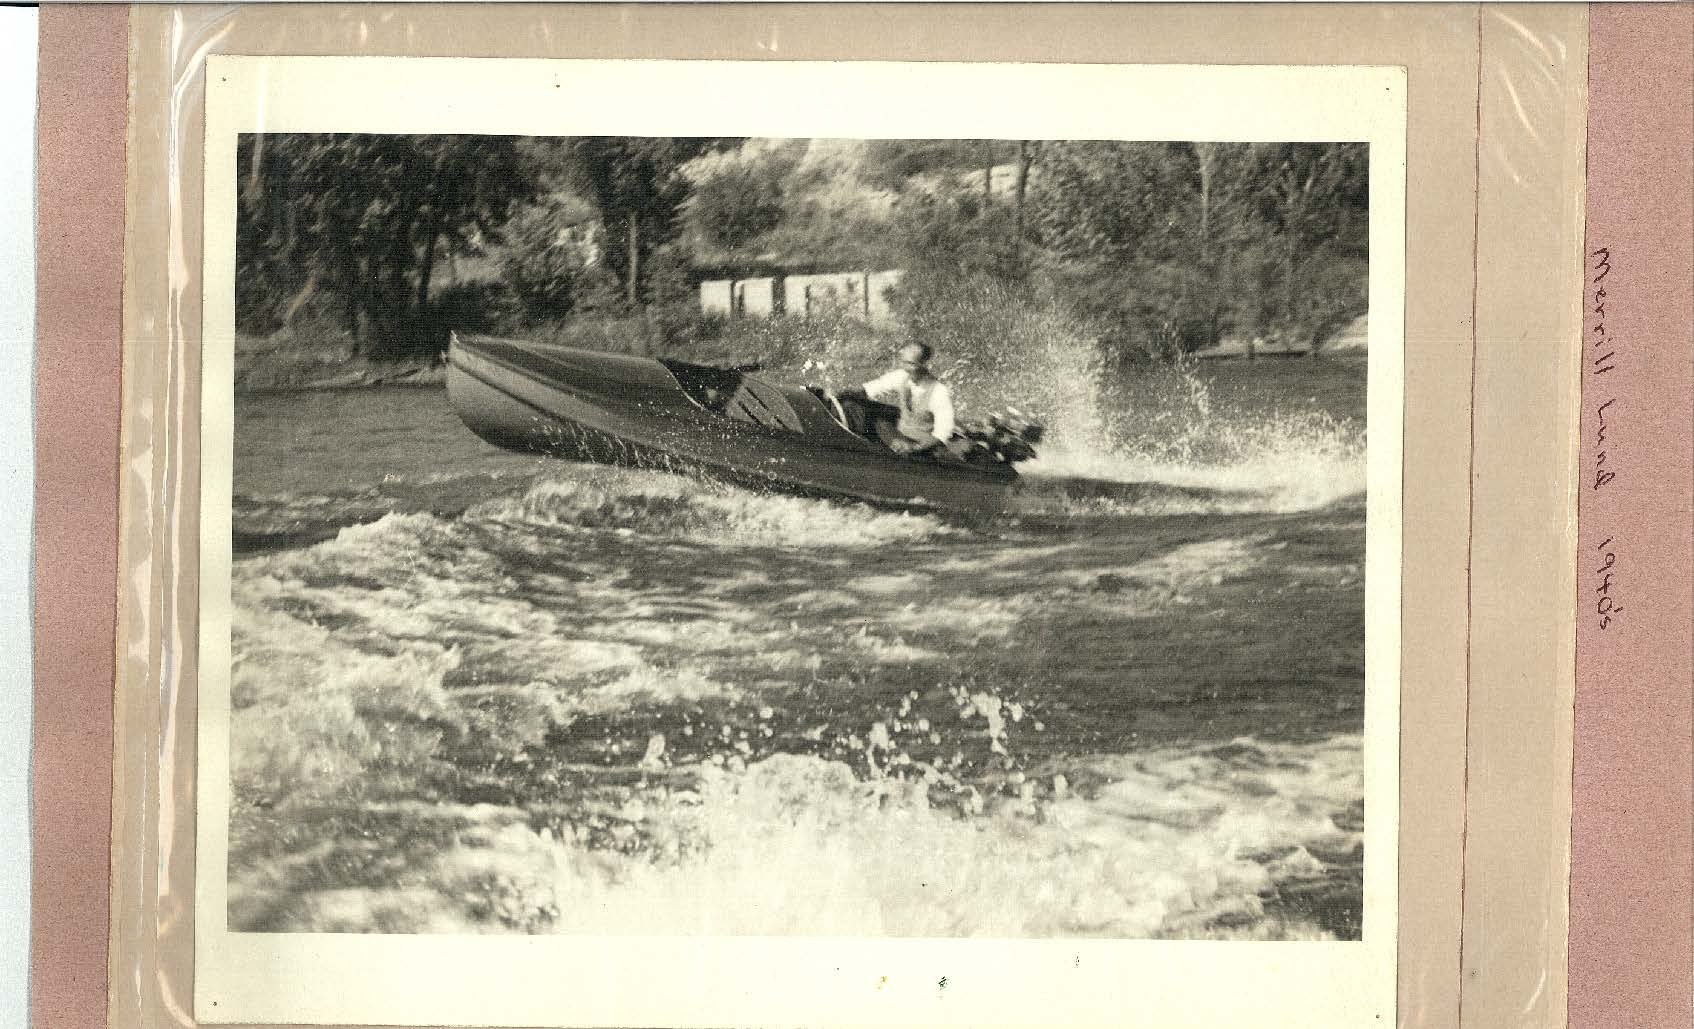 Photo "Merrill Lund 1940's" shows small race boat (can see what appears to be concrete wall upstream of Mohawk)